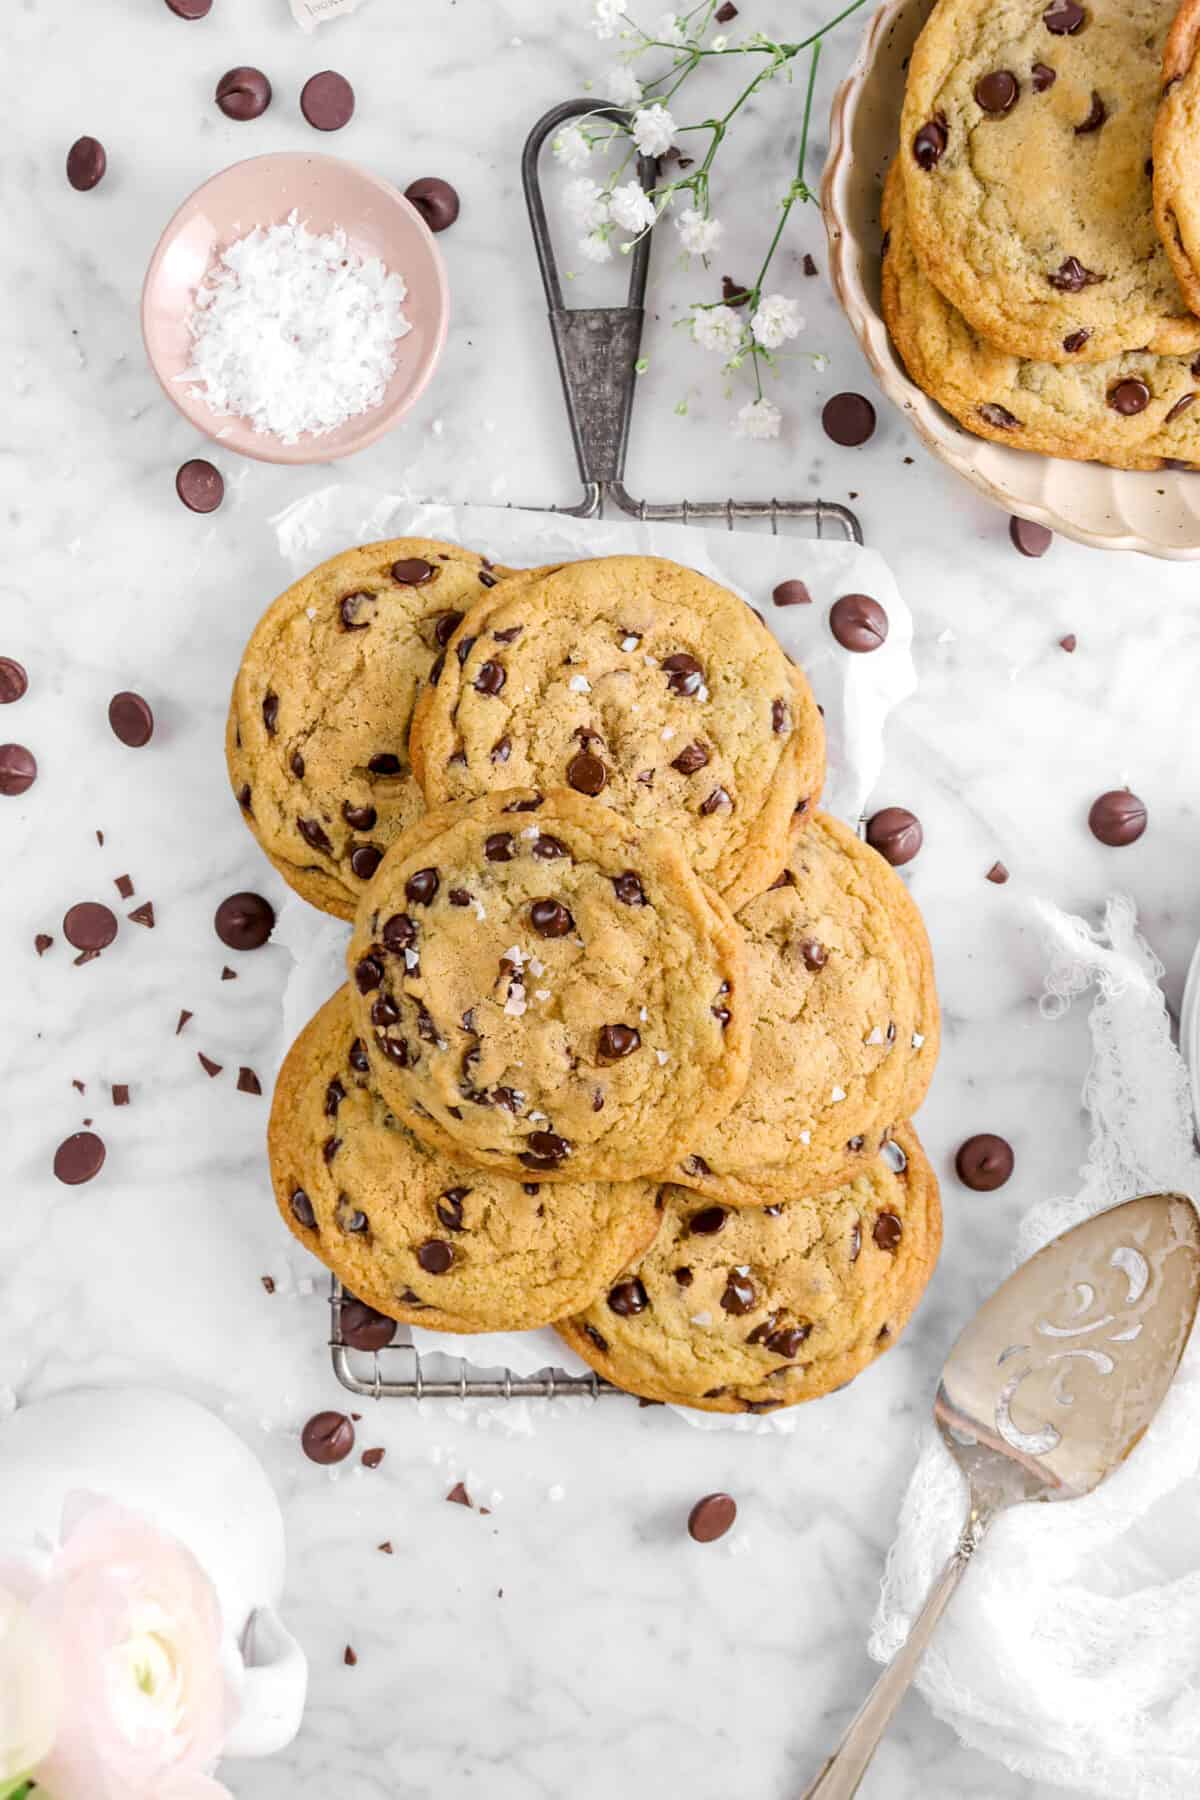 six chocolate chip cookies on serving tray with chocolate chips, a bowl of cookies, a bowl of salt, flowers, and a cake knife